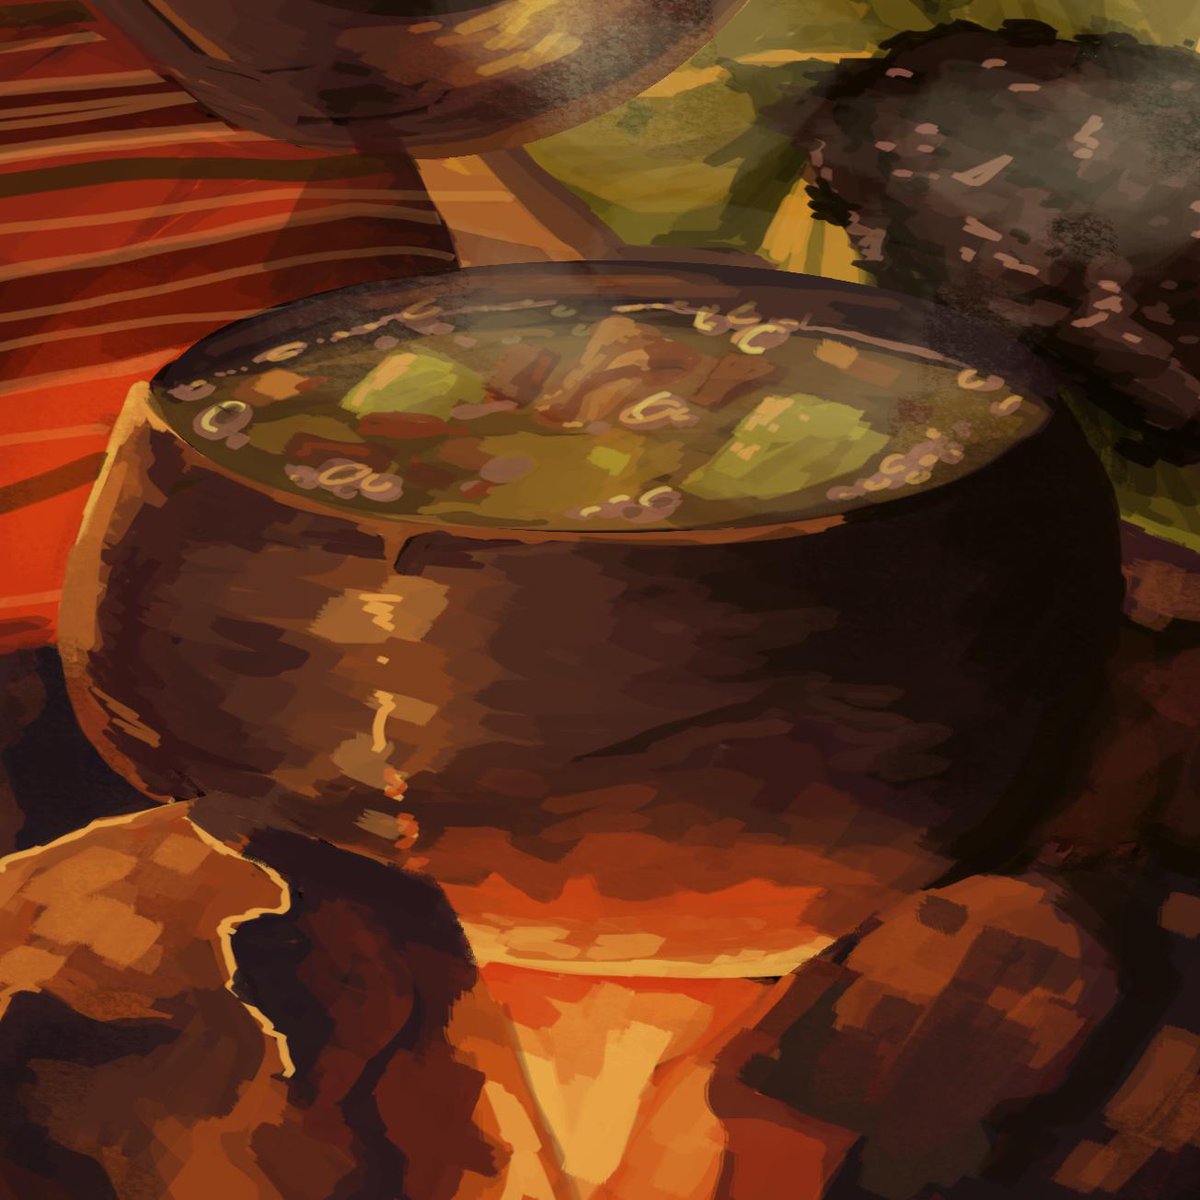 Tsaa Morning Bump For This Piece I Chose To Feature Pinikpikan The First Two Pictures Which Is A Chicken Dish And Tapuy A Rice Wine The Third Pic T Co Gijcxtbjoq